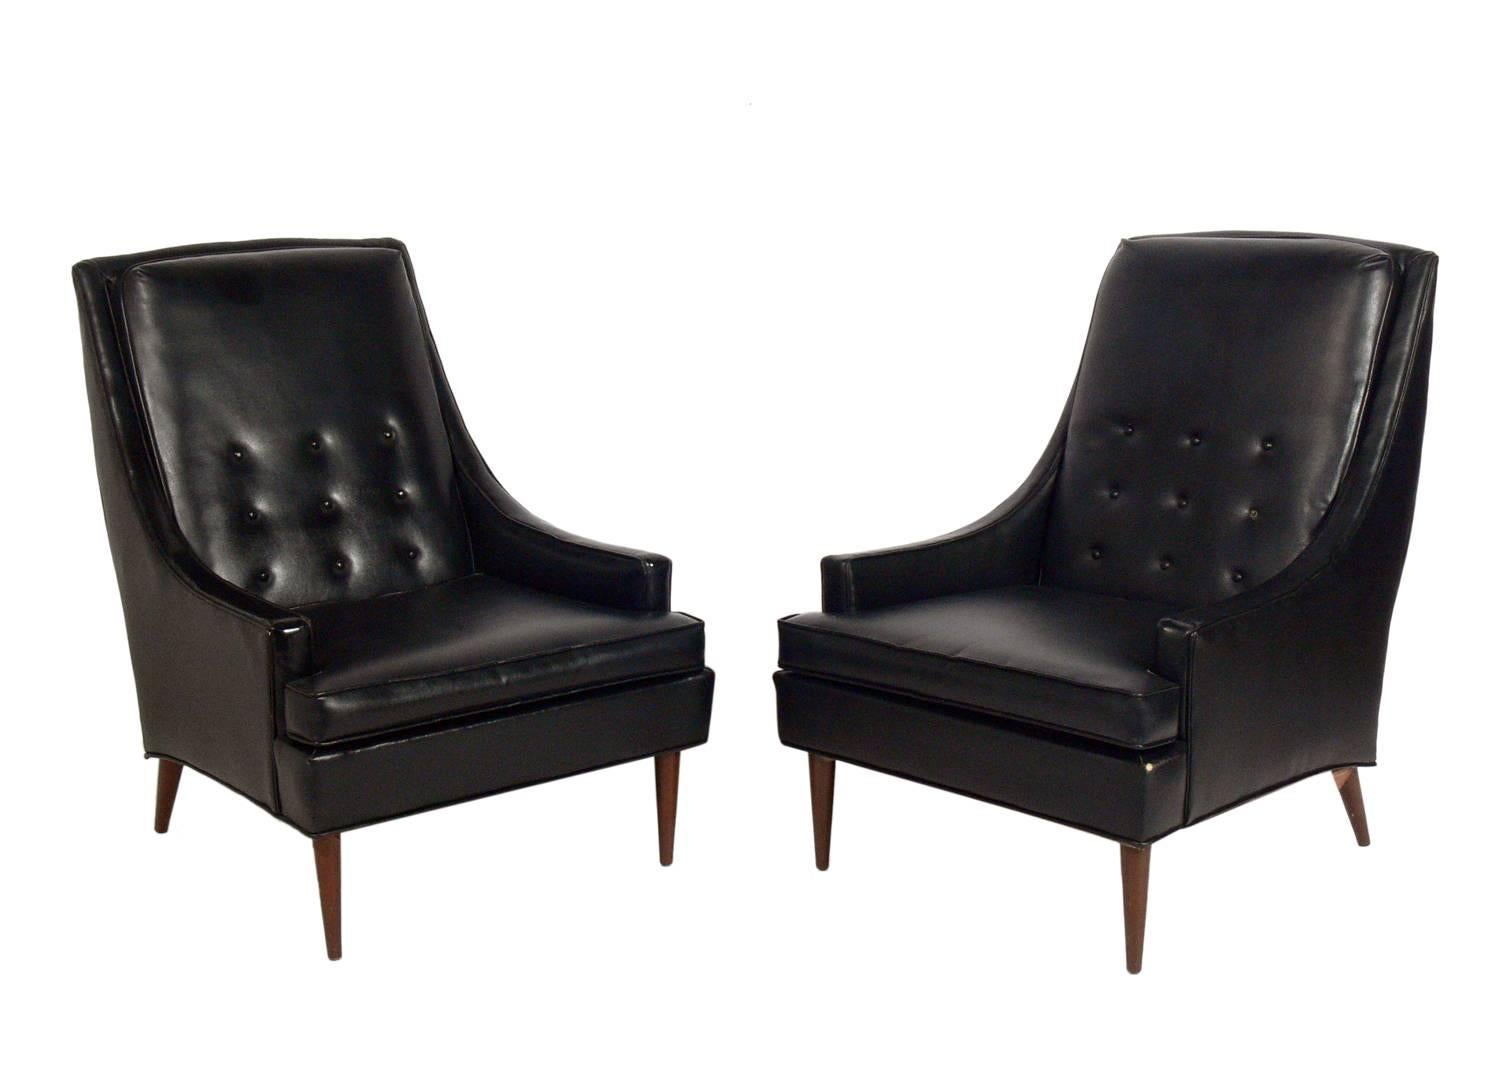 Pair of Mid-Century Modern lounge chairs and ottoman, attributed to Milo Baughman for James Furniture, unsigned, American, circa 1960s. These pieces are currently being refinished and reupholstered, and can be completed in your choice of finish